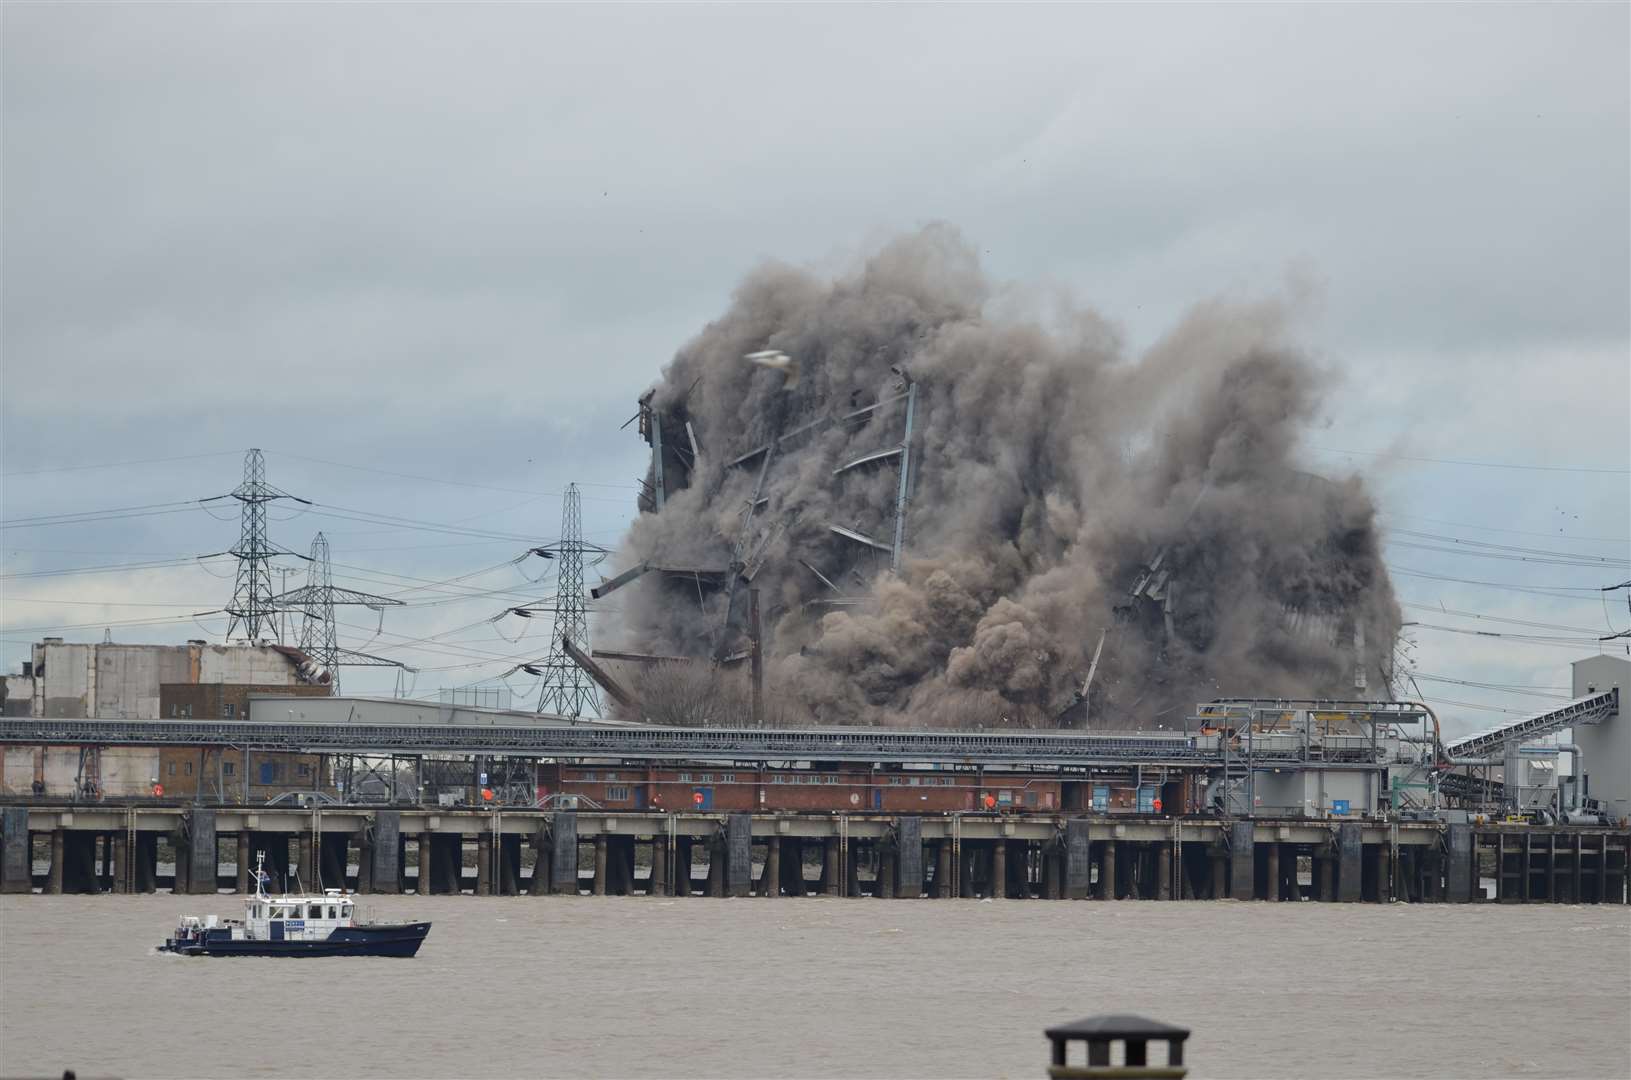 The final demolition of Tilbury Power Station took place this morning. Picture: @jasonphoto (7778336)